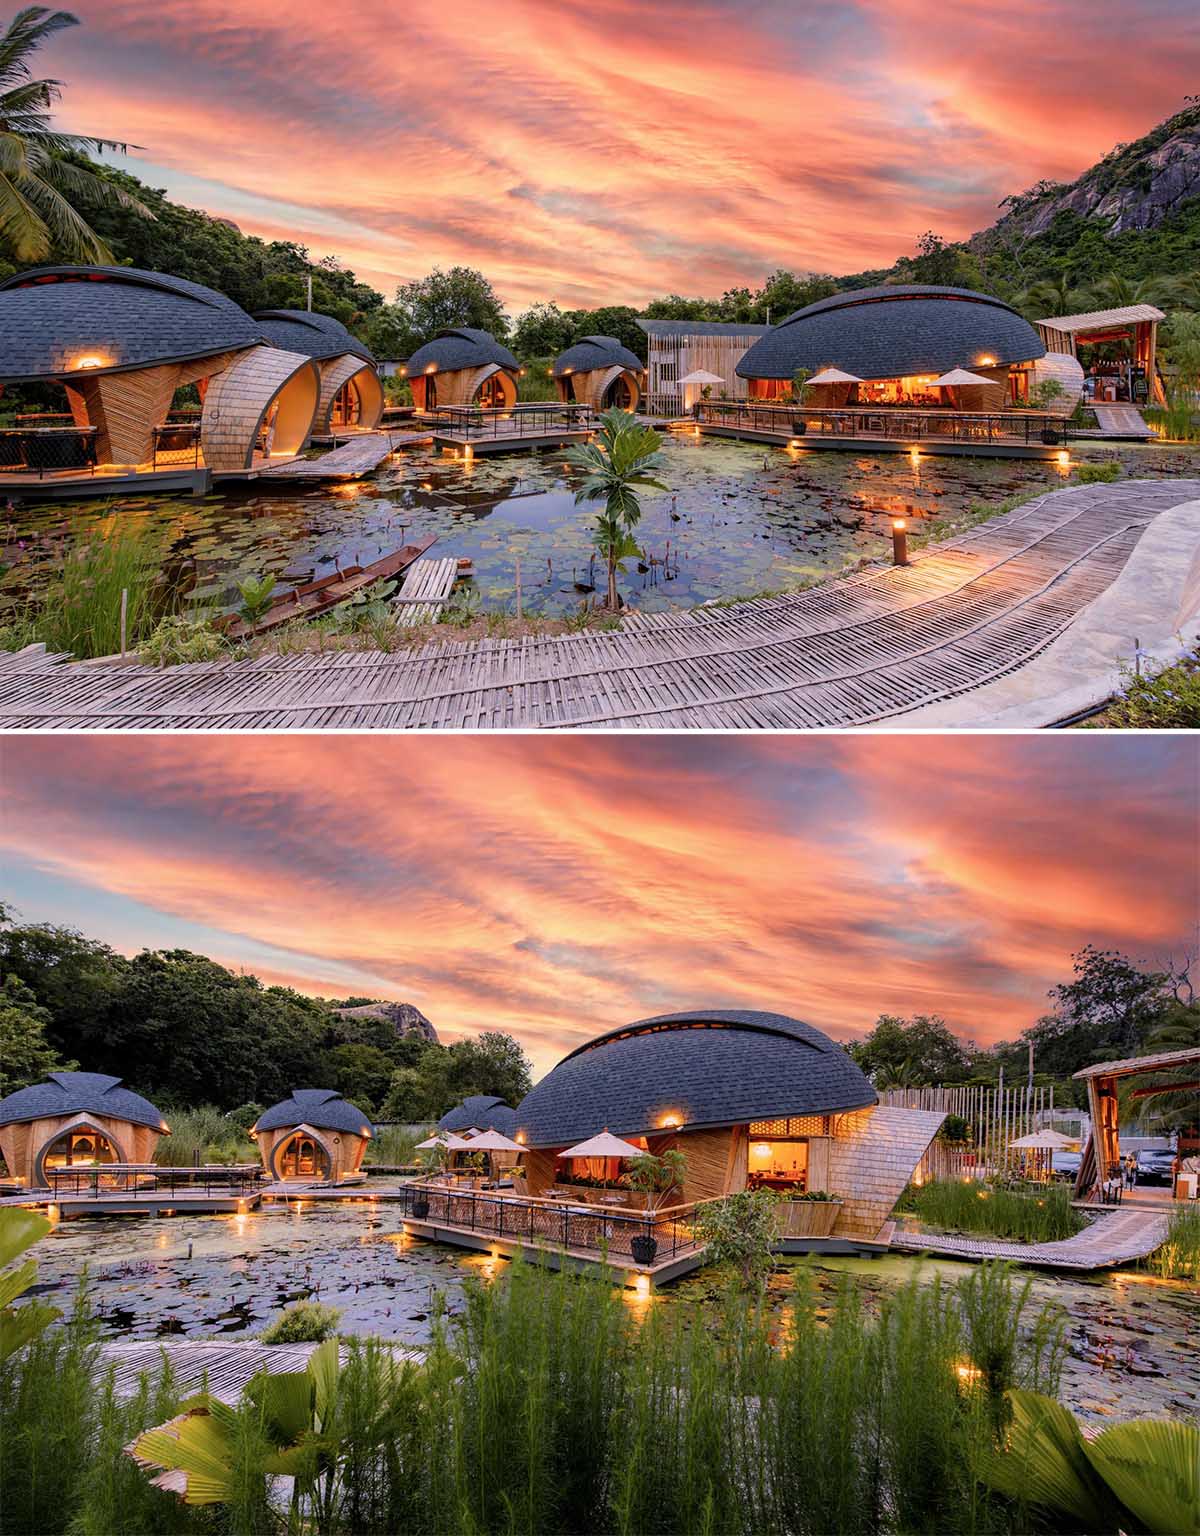 A modern eco-lodge in Thailand, that has cabins shaped like turtle shells that surround a lotus pond.